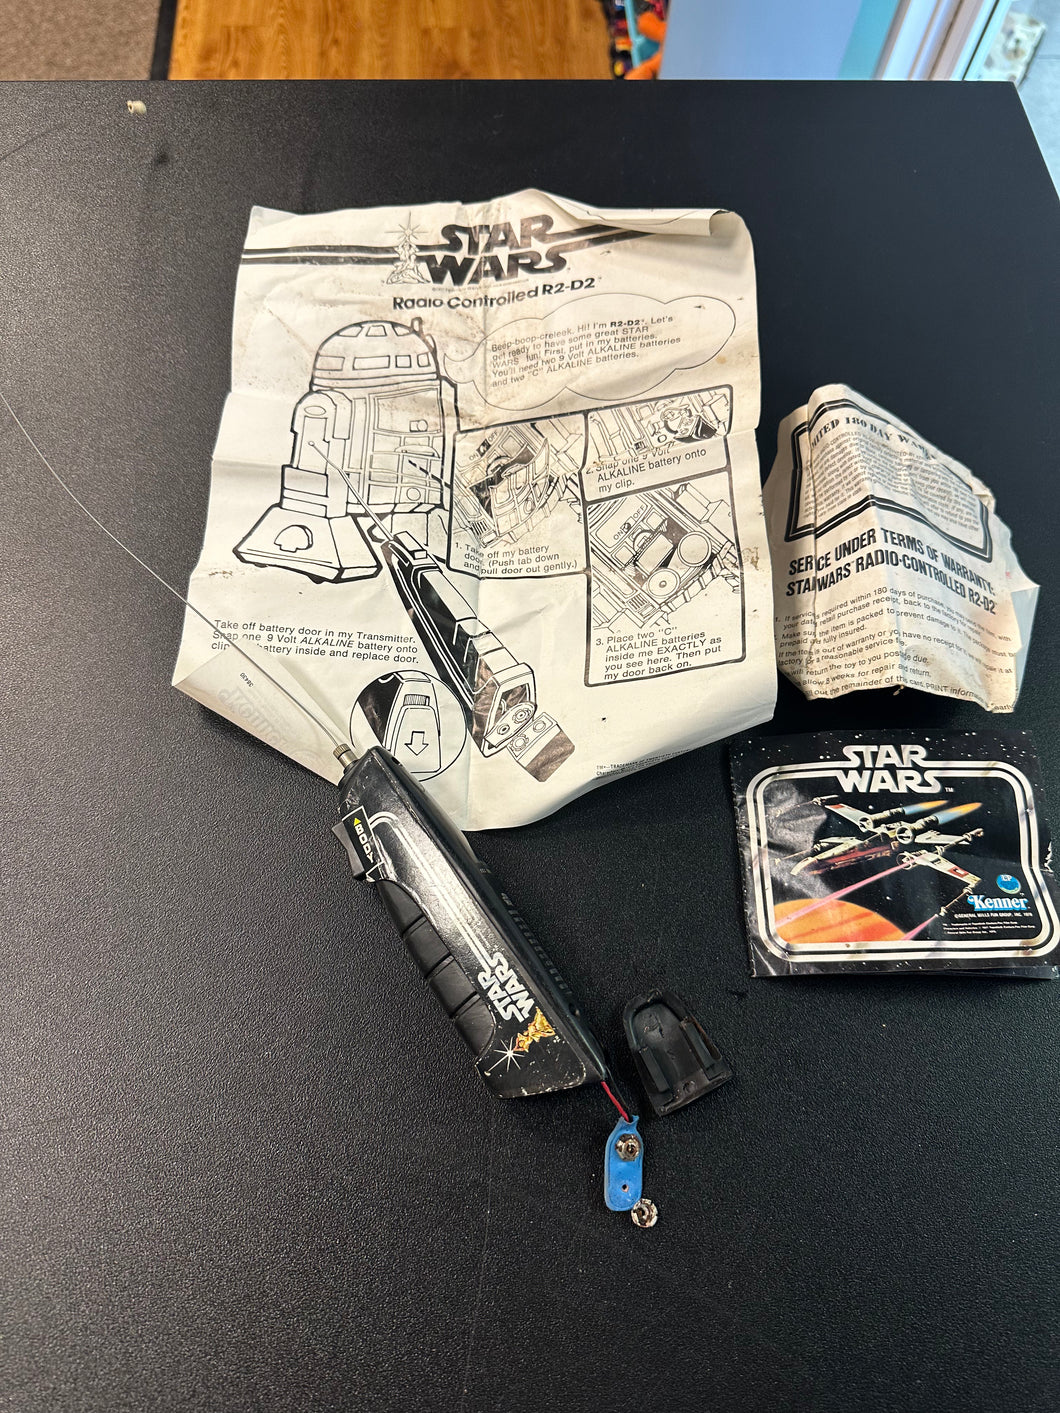 Star Wars Radio Contoller for R2-D2 & Instructions DAMAGED